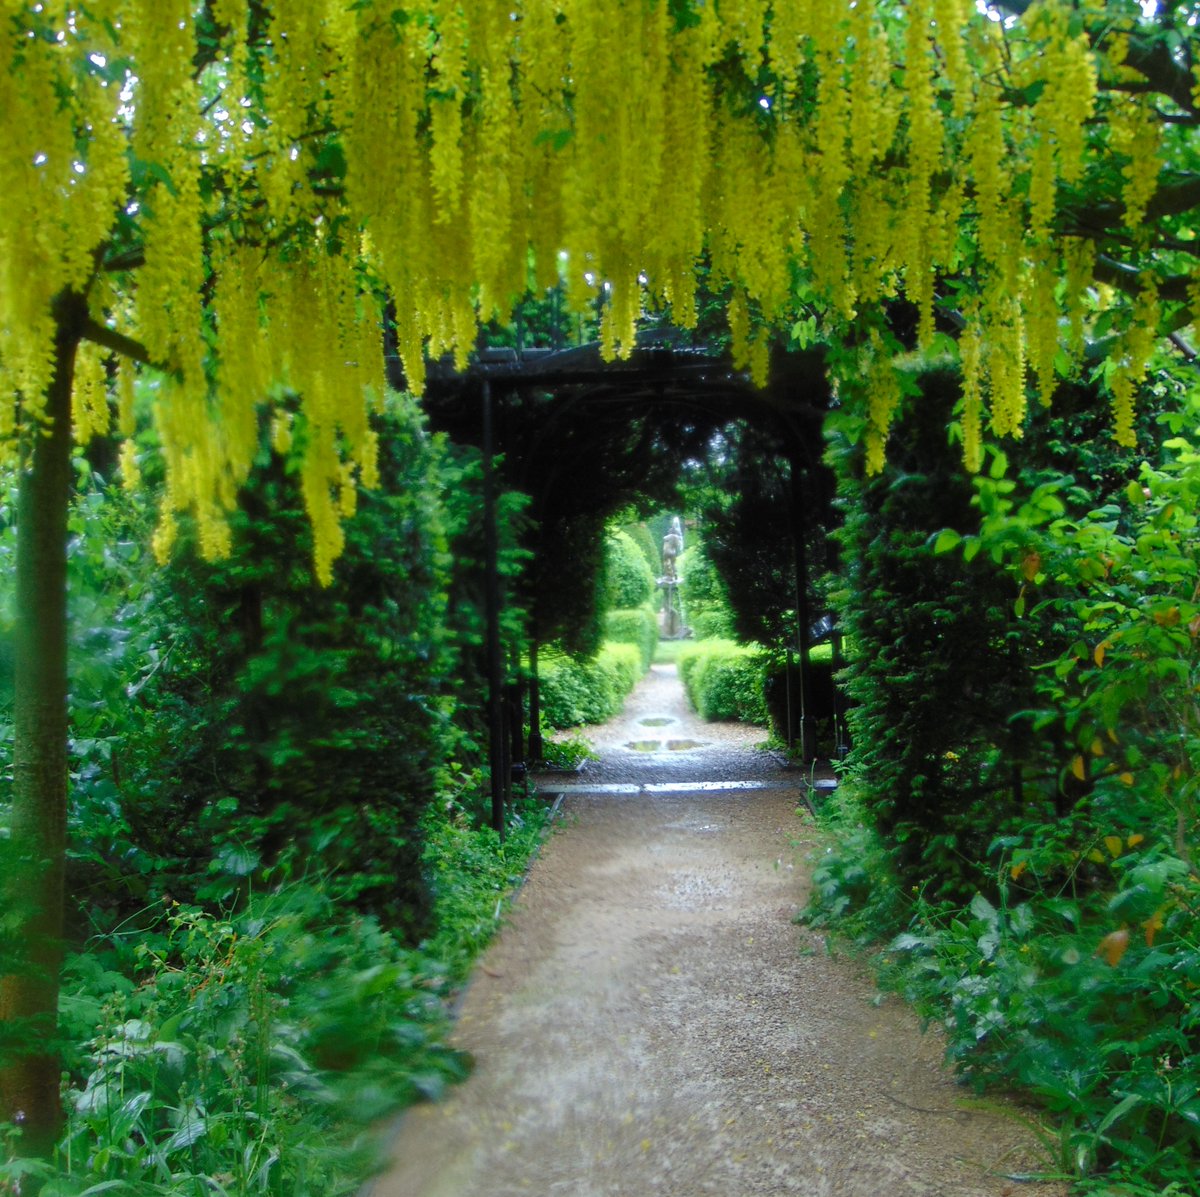 It can't decide to be sunny or cloudy. I know what I prefer. Nice to find a place almost devoid of people, though I do sometimes like to snap workers or walkers. #theferrisfiles #metaphorsaplenty #pergola #ferrisphotos #saffronwalden